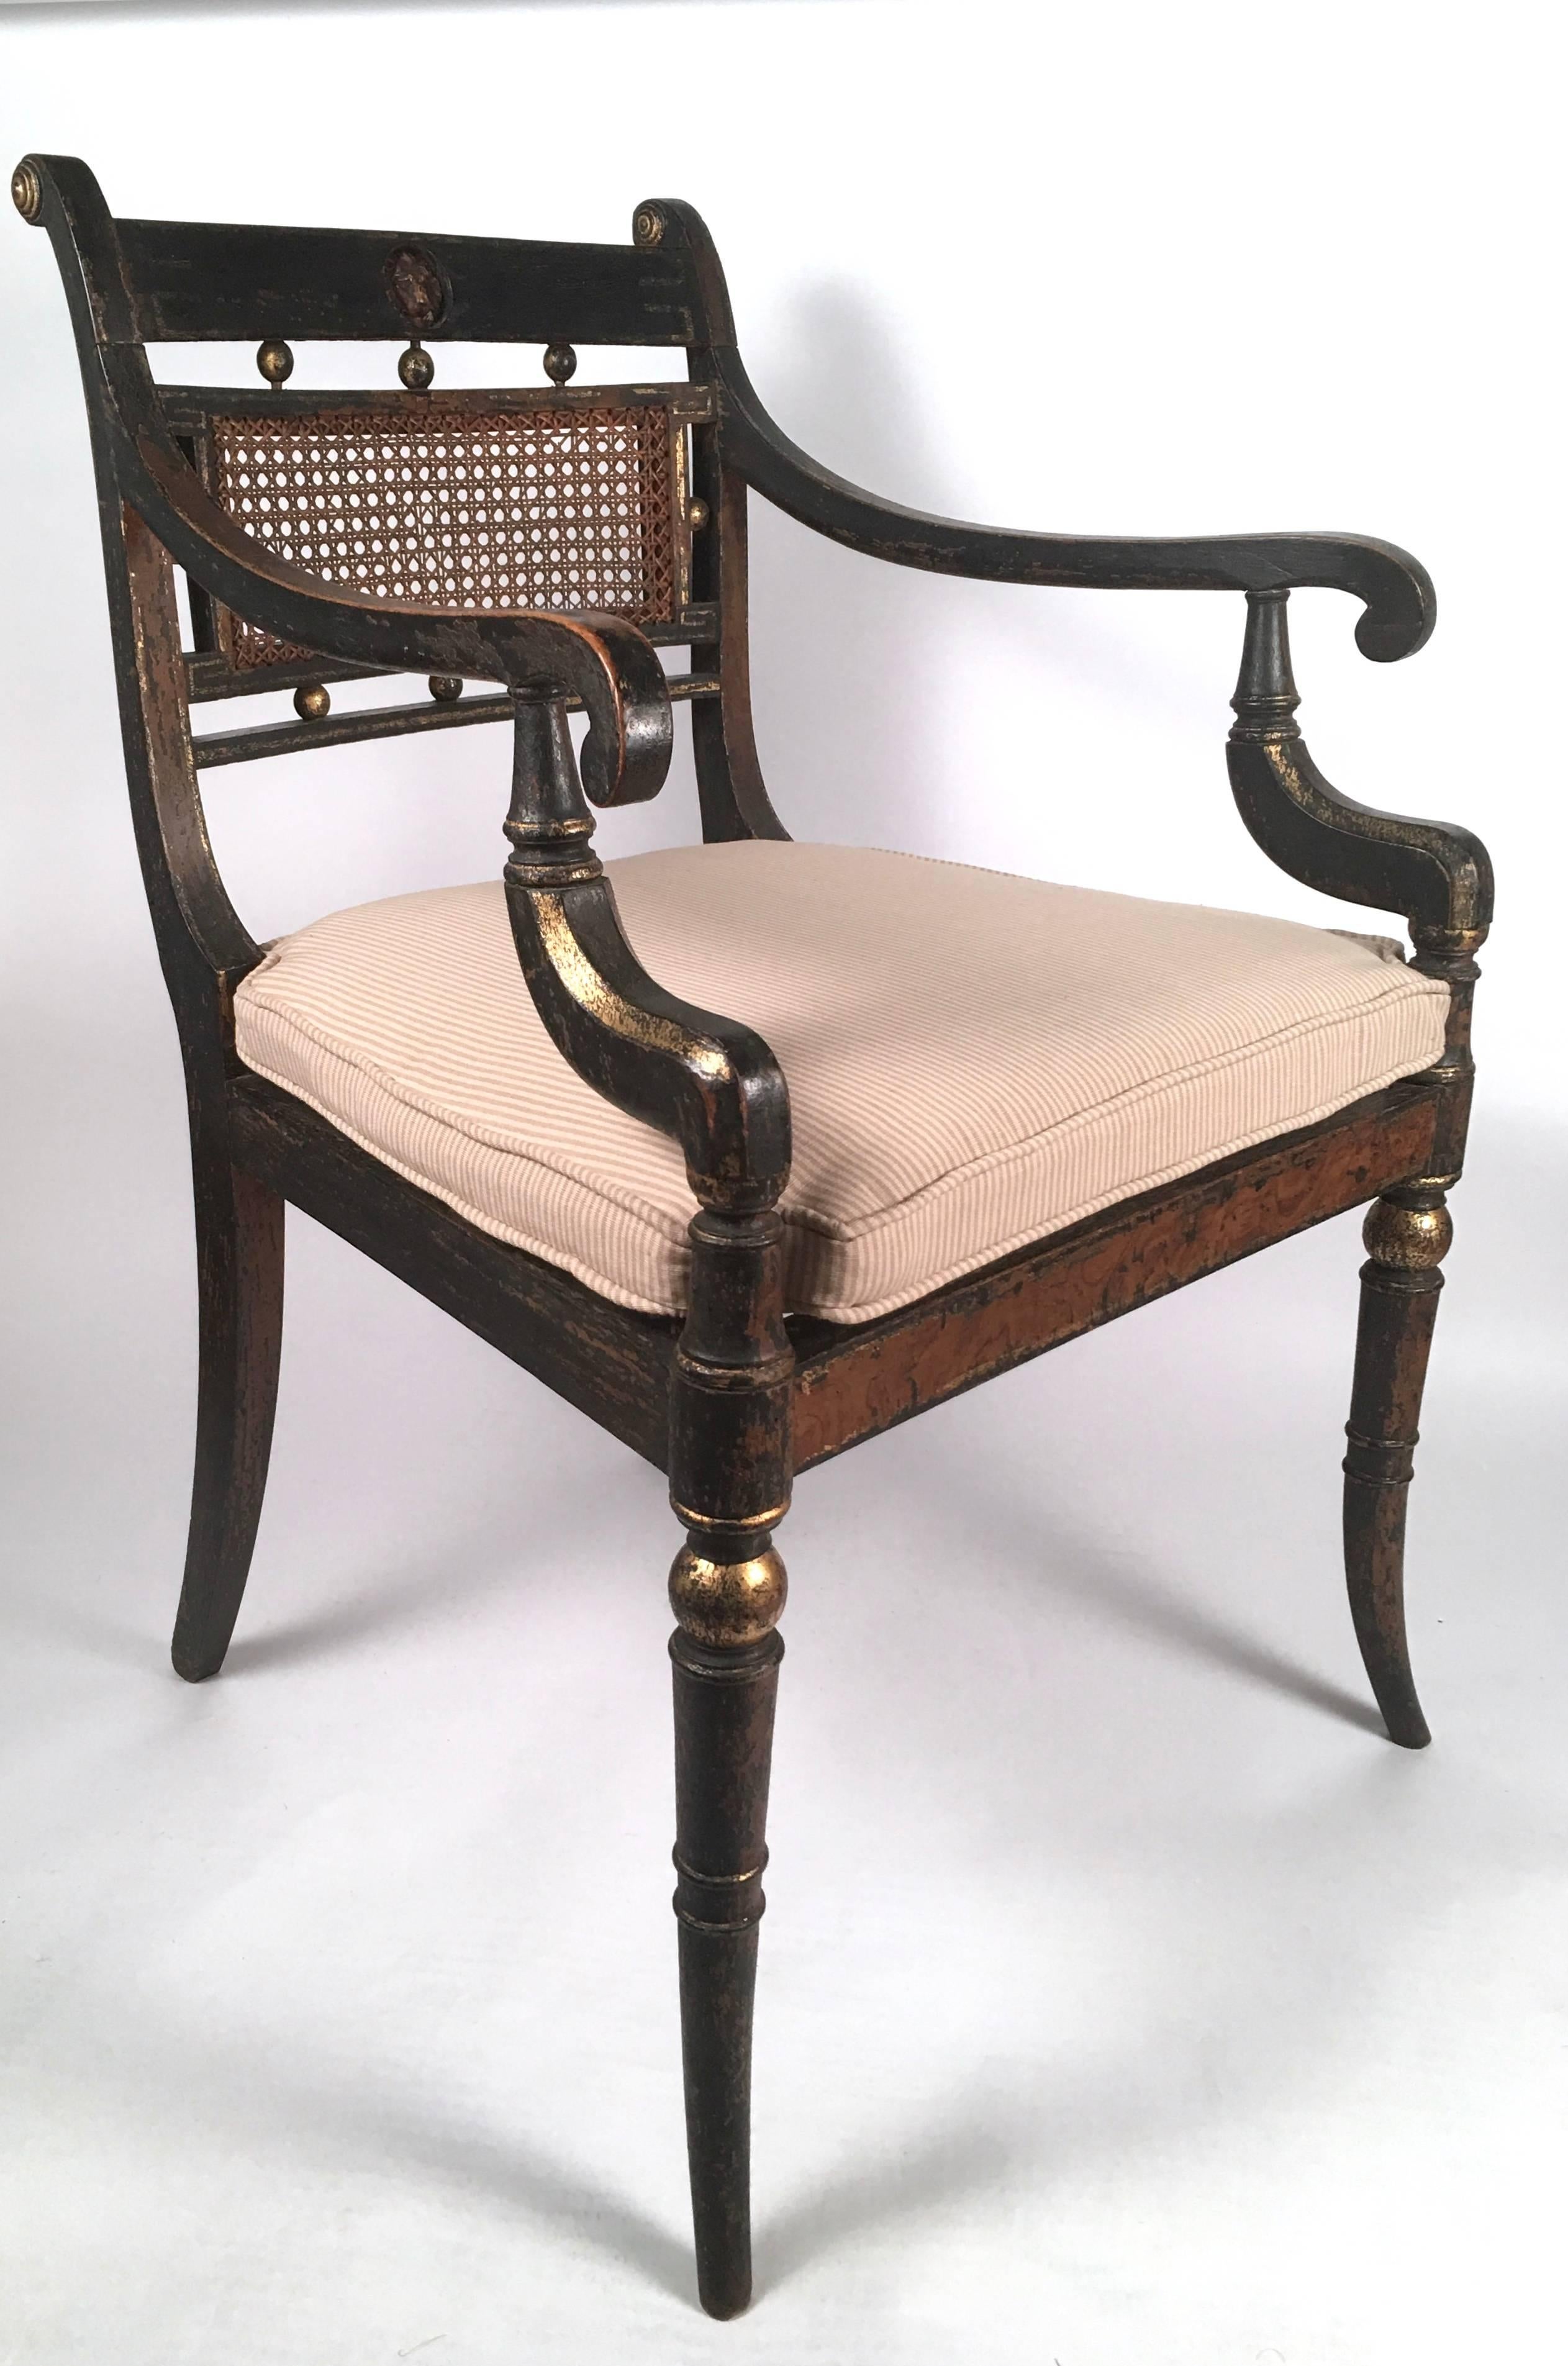 A pair of elegant, well proportioned English Regency period ebonized and parcel gilt open arm chairs, with carved lions masks on the backs above gilded spheres and a caned back, flanked by elegantly scrolled downswept arms over a conforming caned